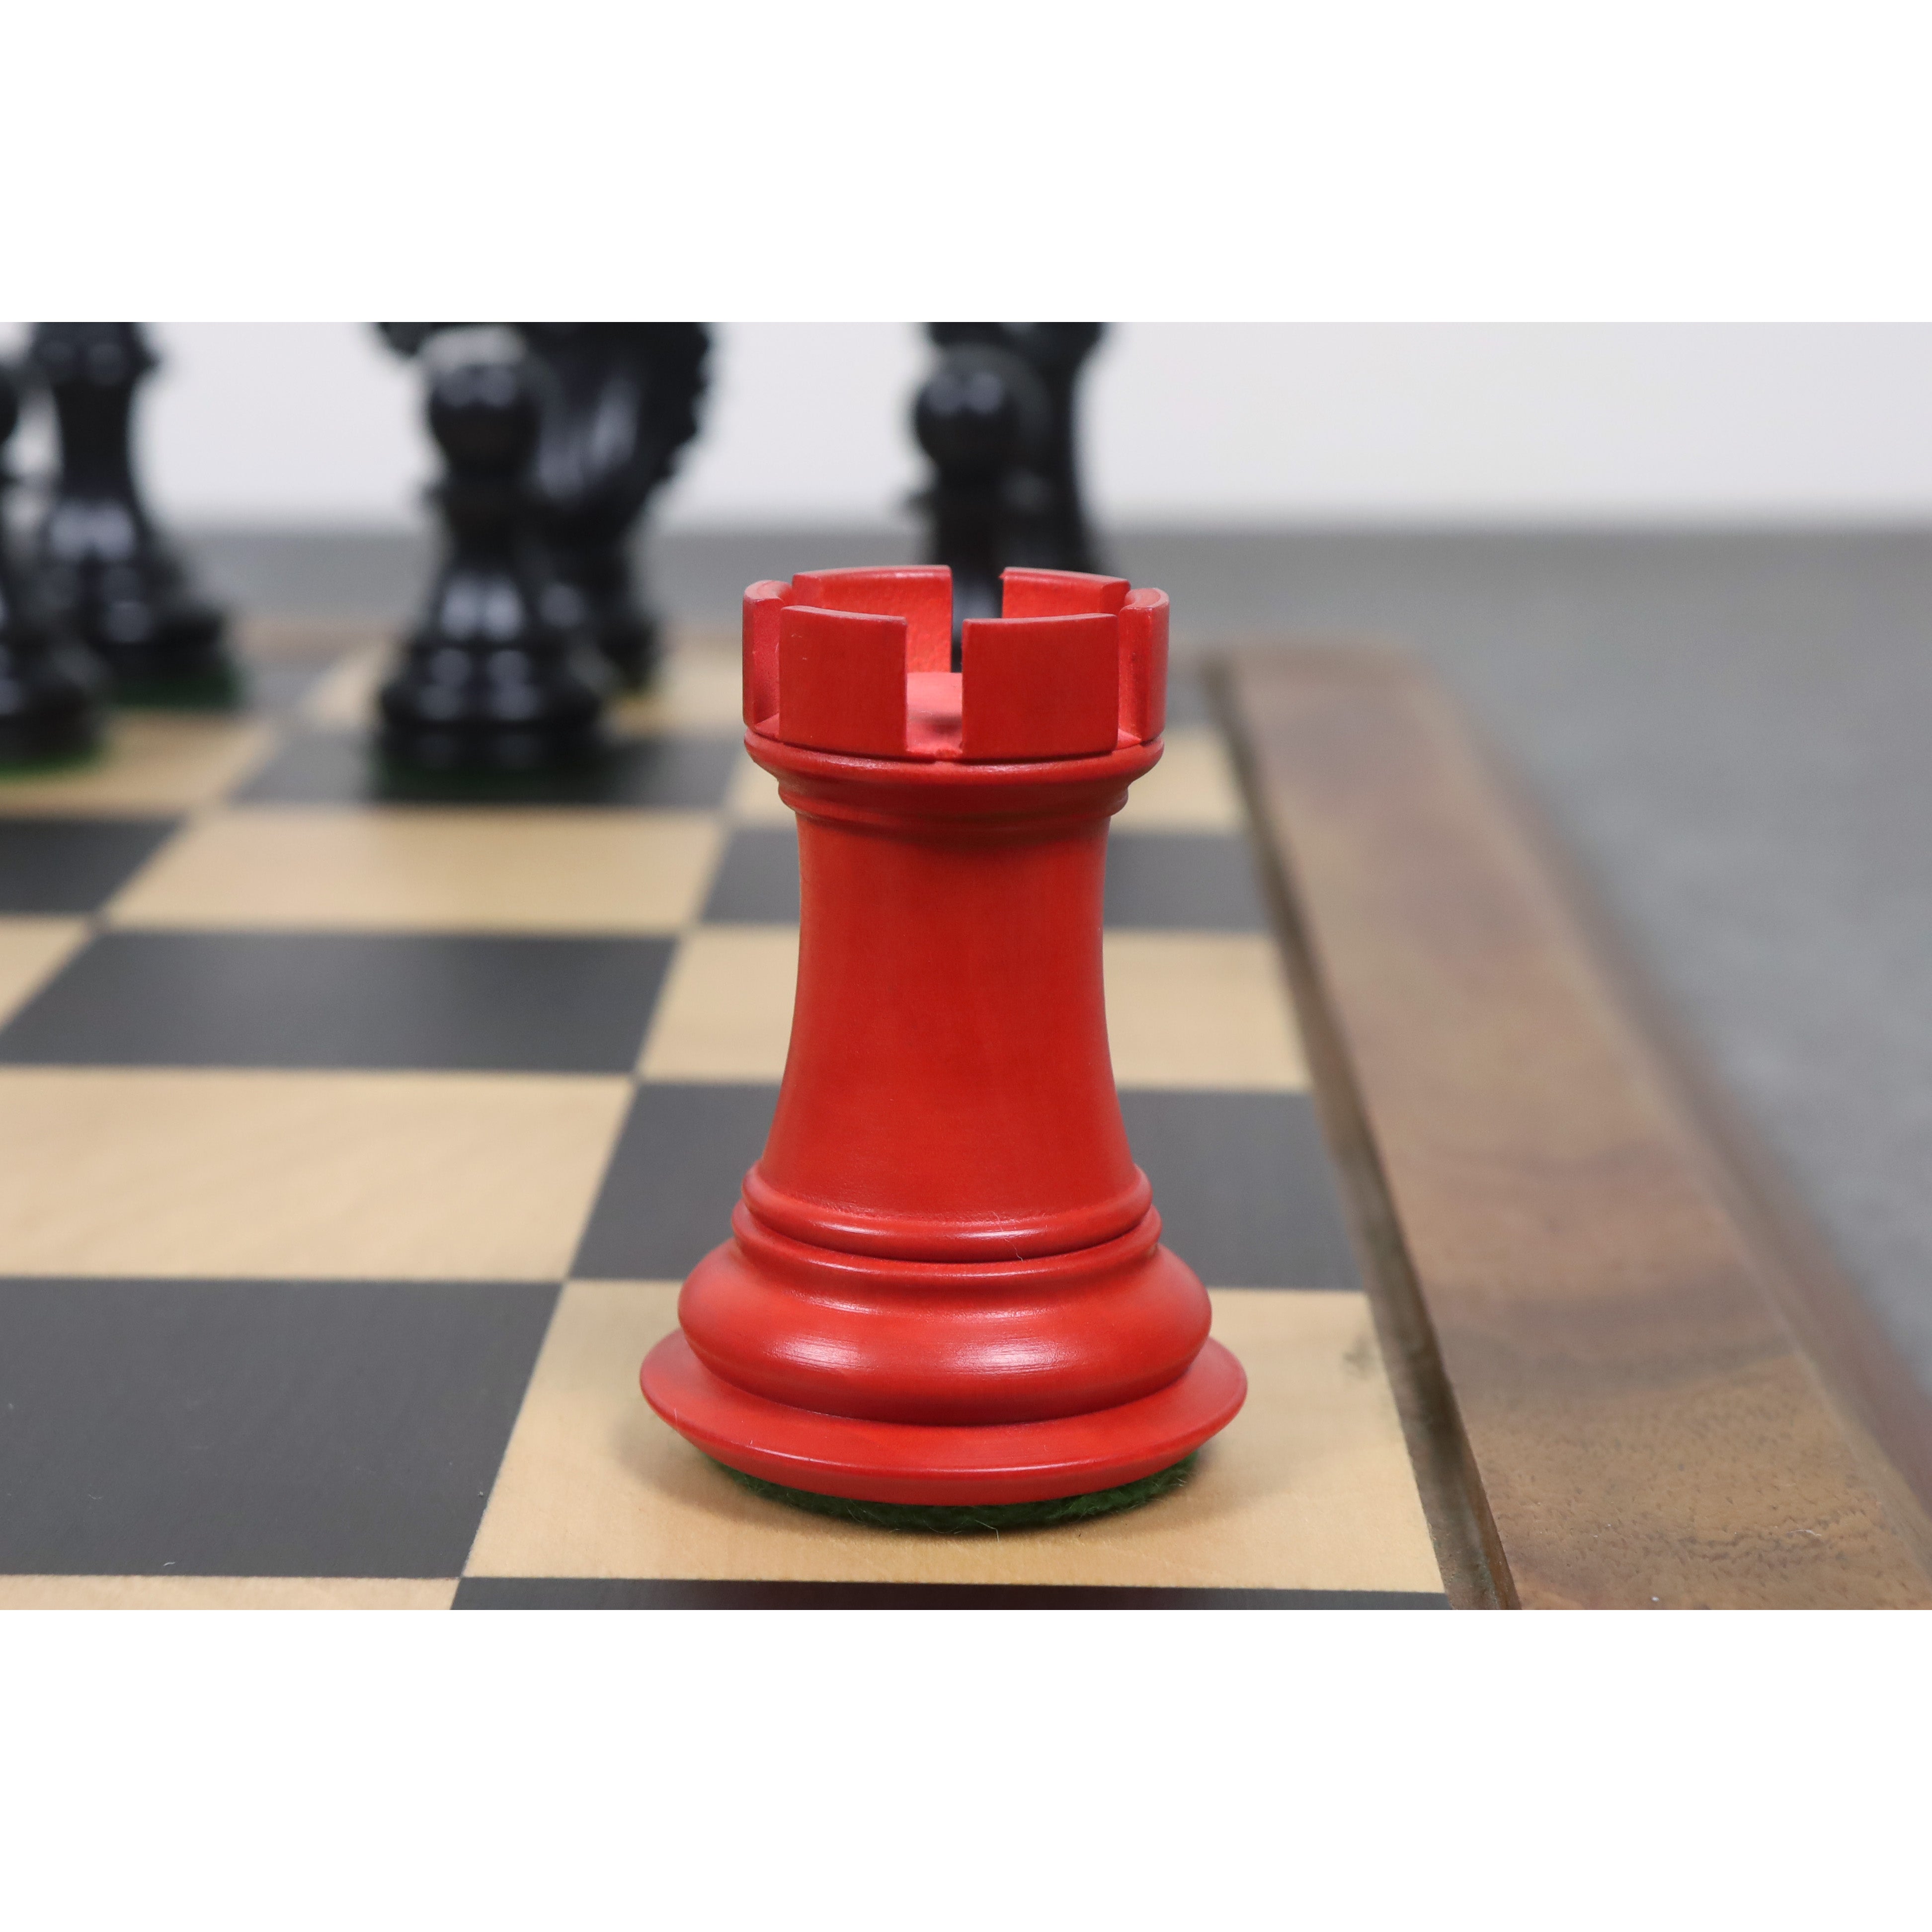 Slightly Imperfect 3.9" Alban Staunton Chess Pieces Only set- Double Weighted Red & Black Dyed Wood